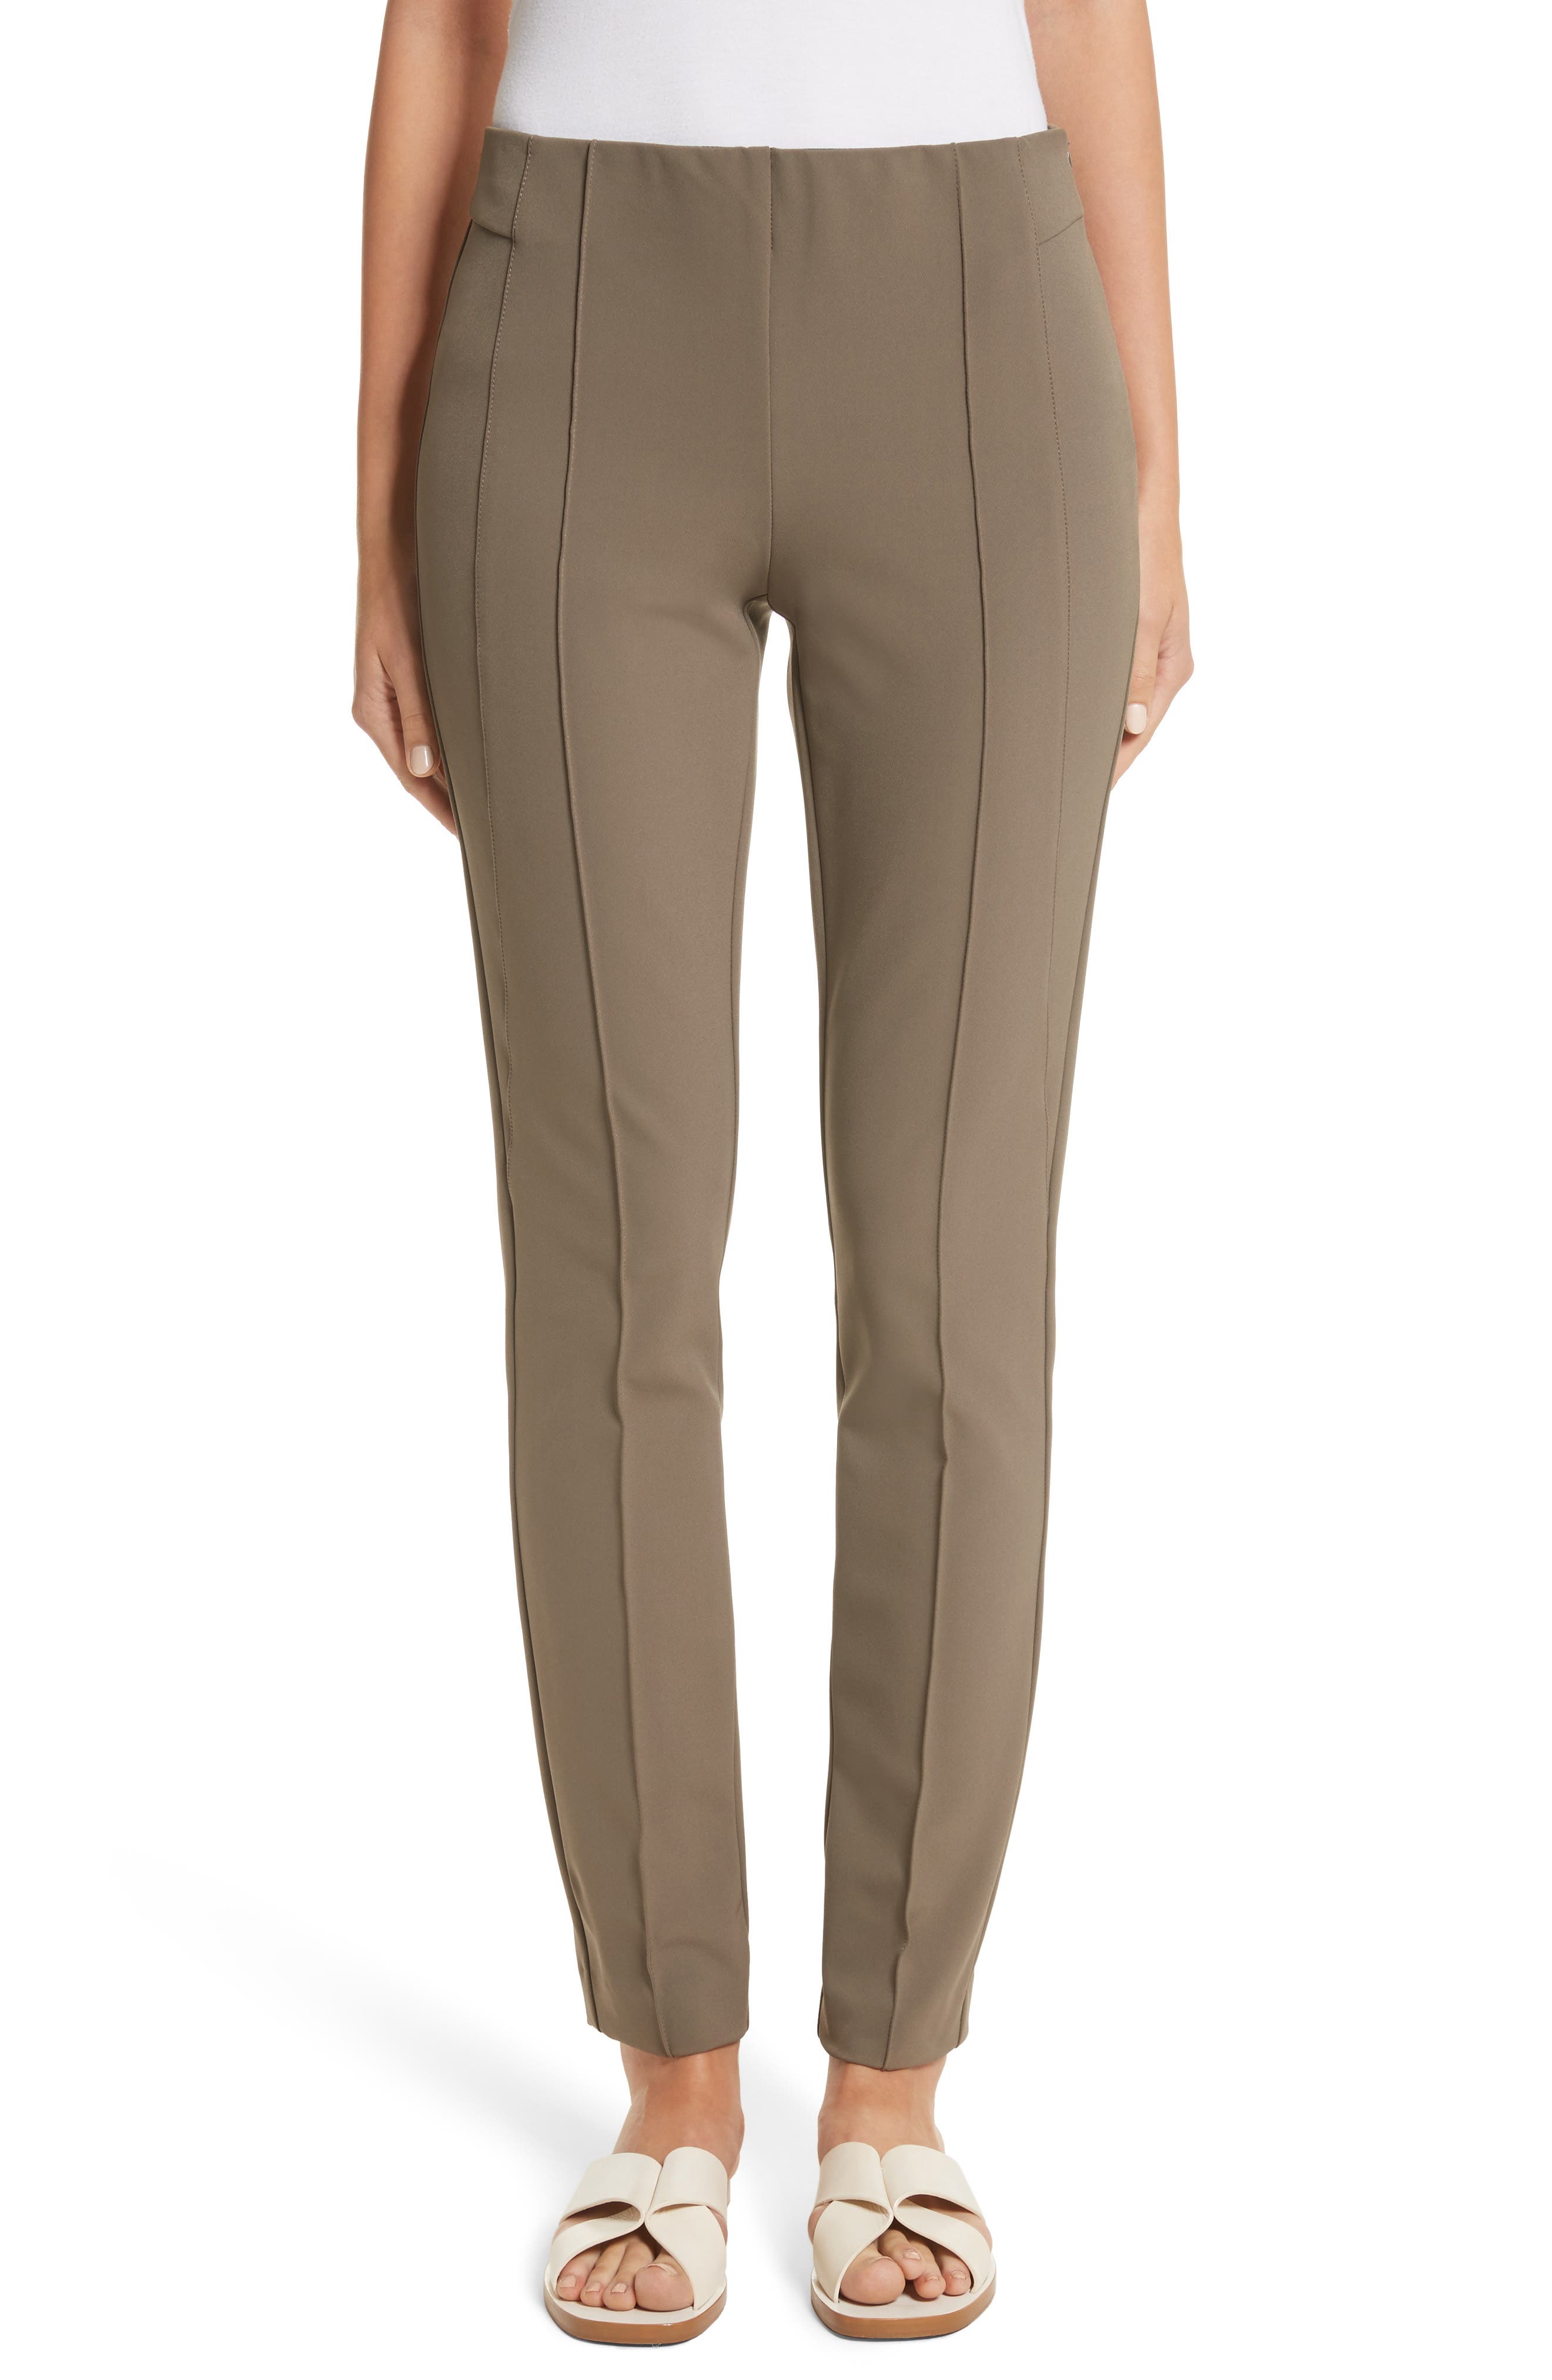 Buy Rose Taupe Color Cotton Trousers for Women  Regular Fit Cotton  Naariy